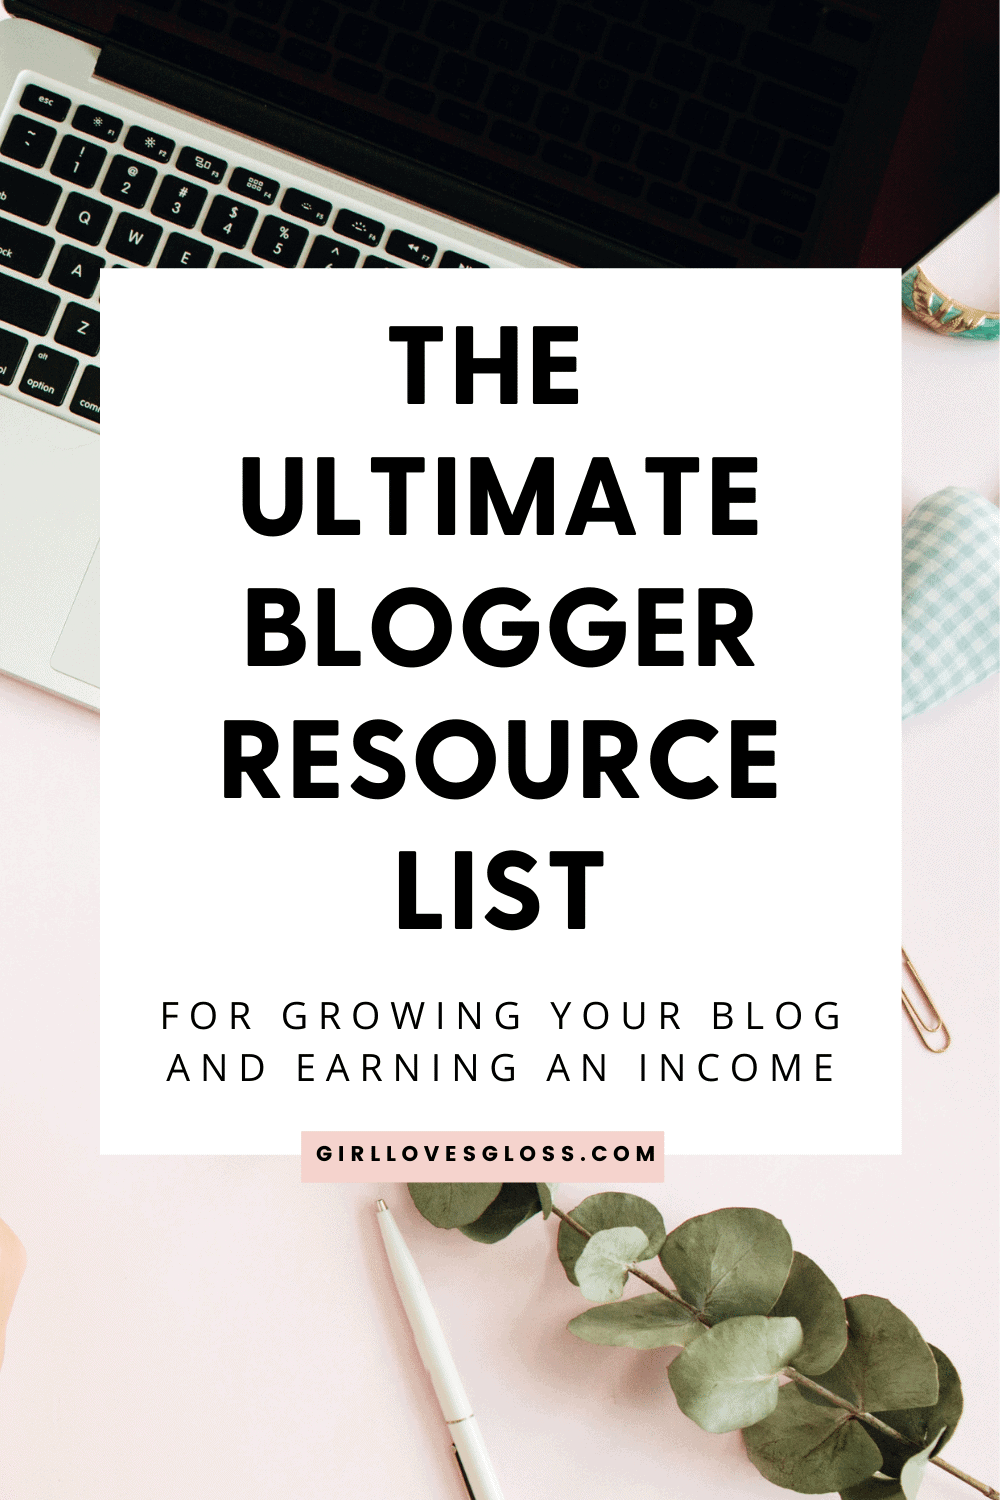 The Ultimate Blogger Resource List